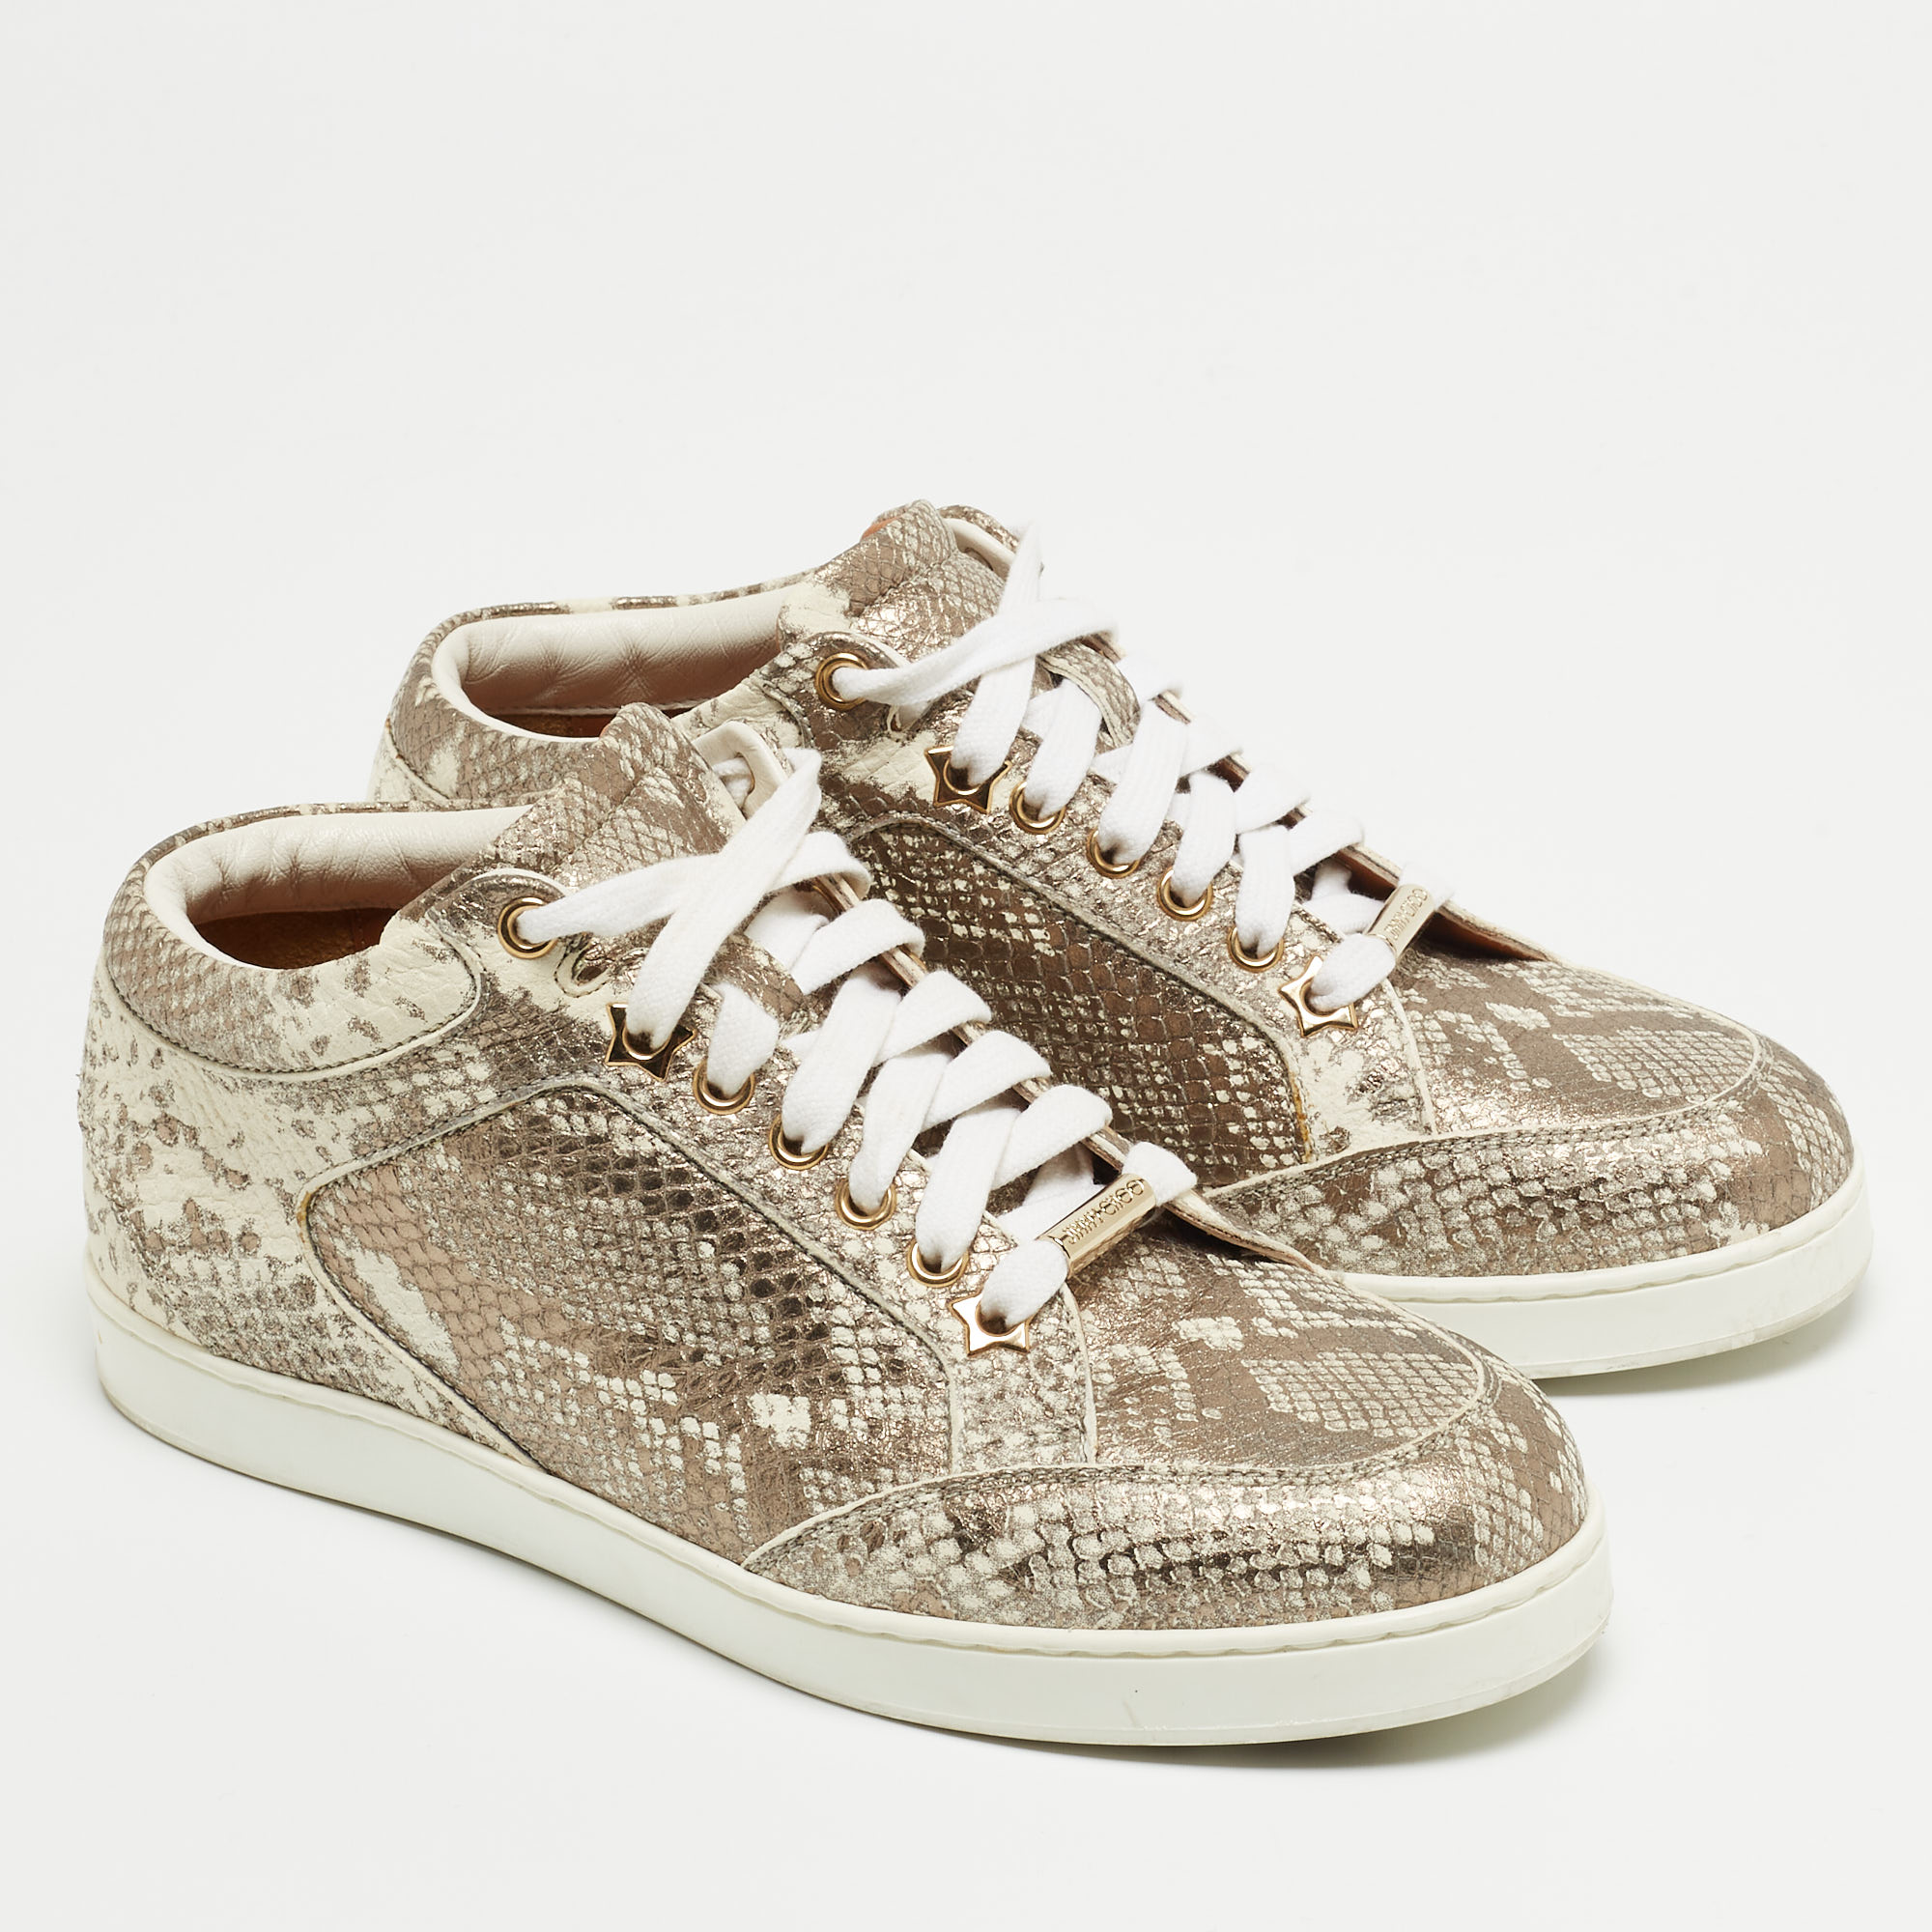 Jimmy Choo Metallic White Python Embossed Leather Low Top Sneakers Size 36